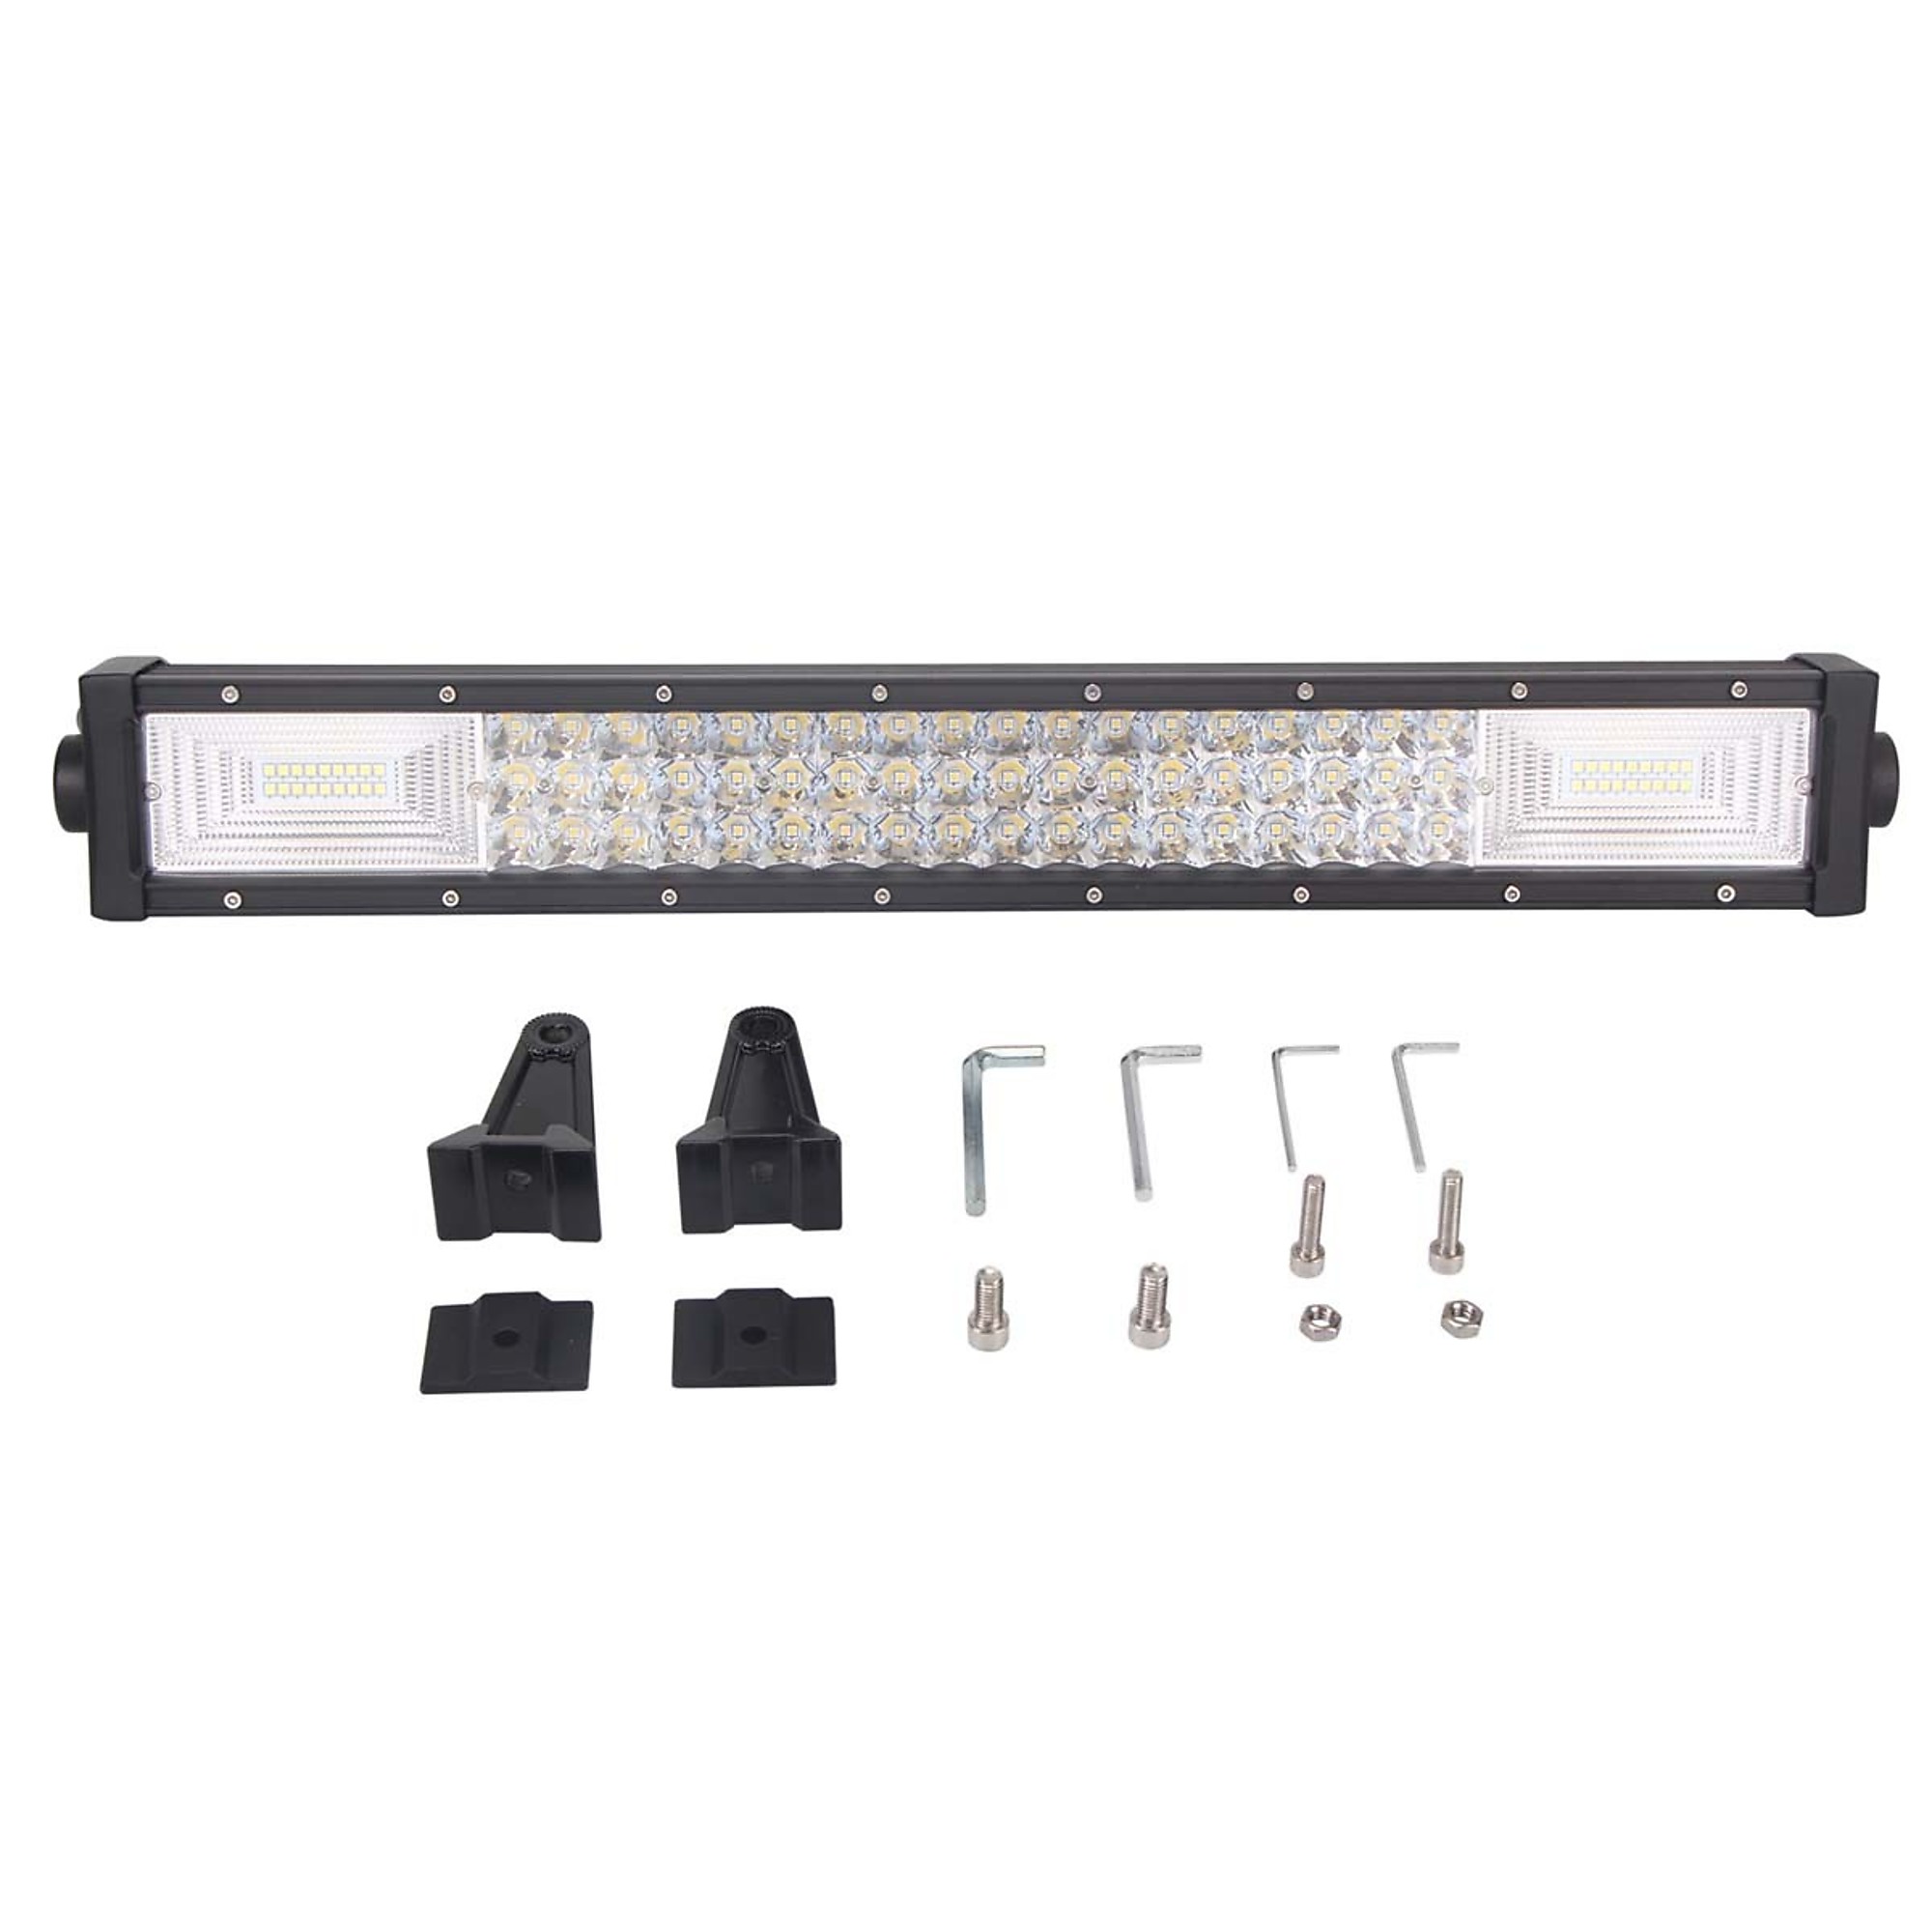 Race Sport Lighting, Excursion Series 22Inch 120W LED Light Bar 3-Rows, Light Type LED, Lens Color Clear, Included (qty.) 1 Model 1006485